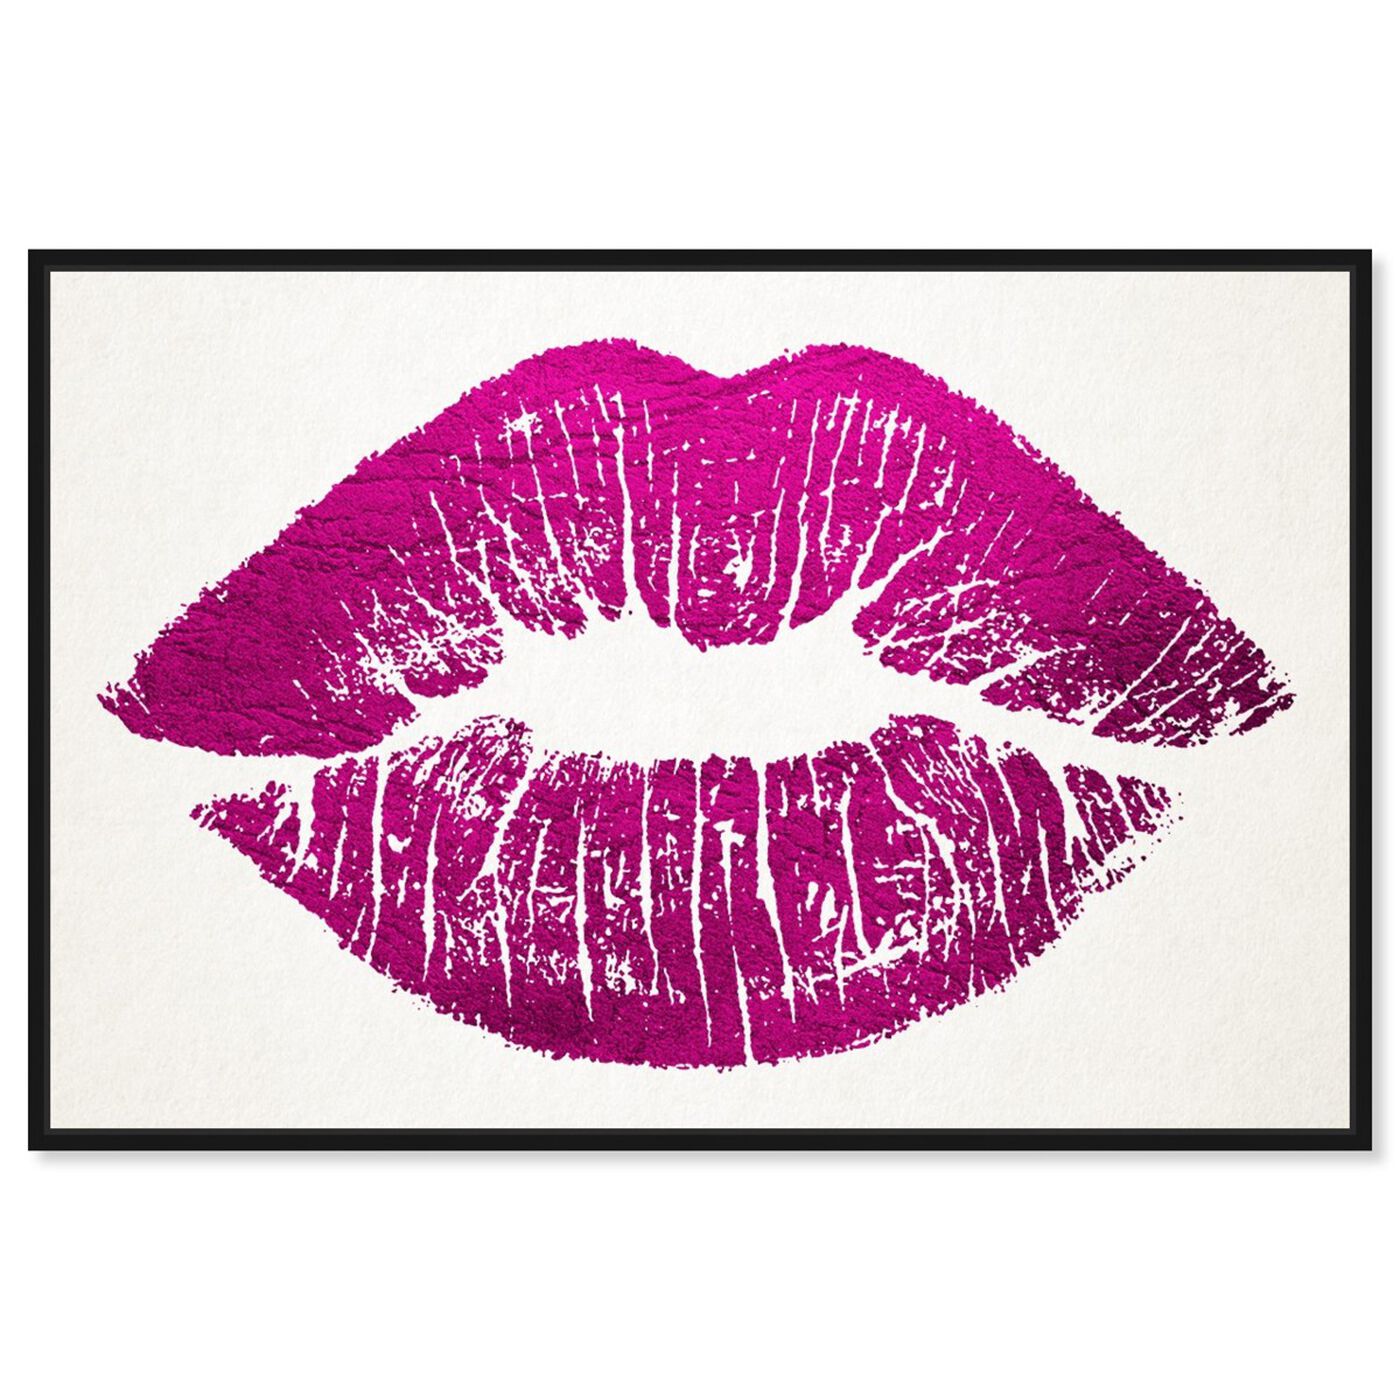 Oliver Gal 'Solid Kiss Blush and Gold' Fashion and Glam Wall Art Canvas Print - Gold, Pink - 15 x 10